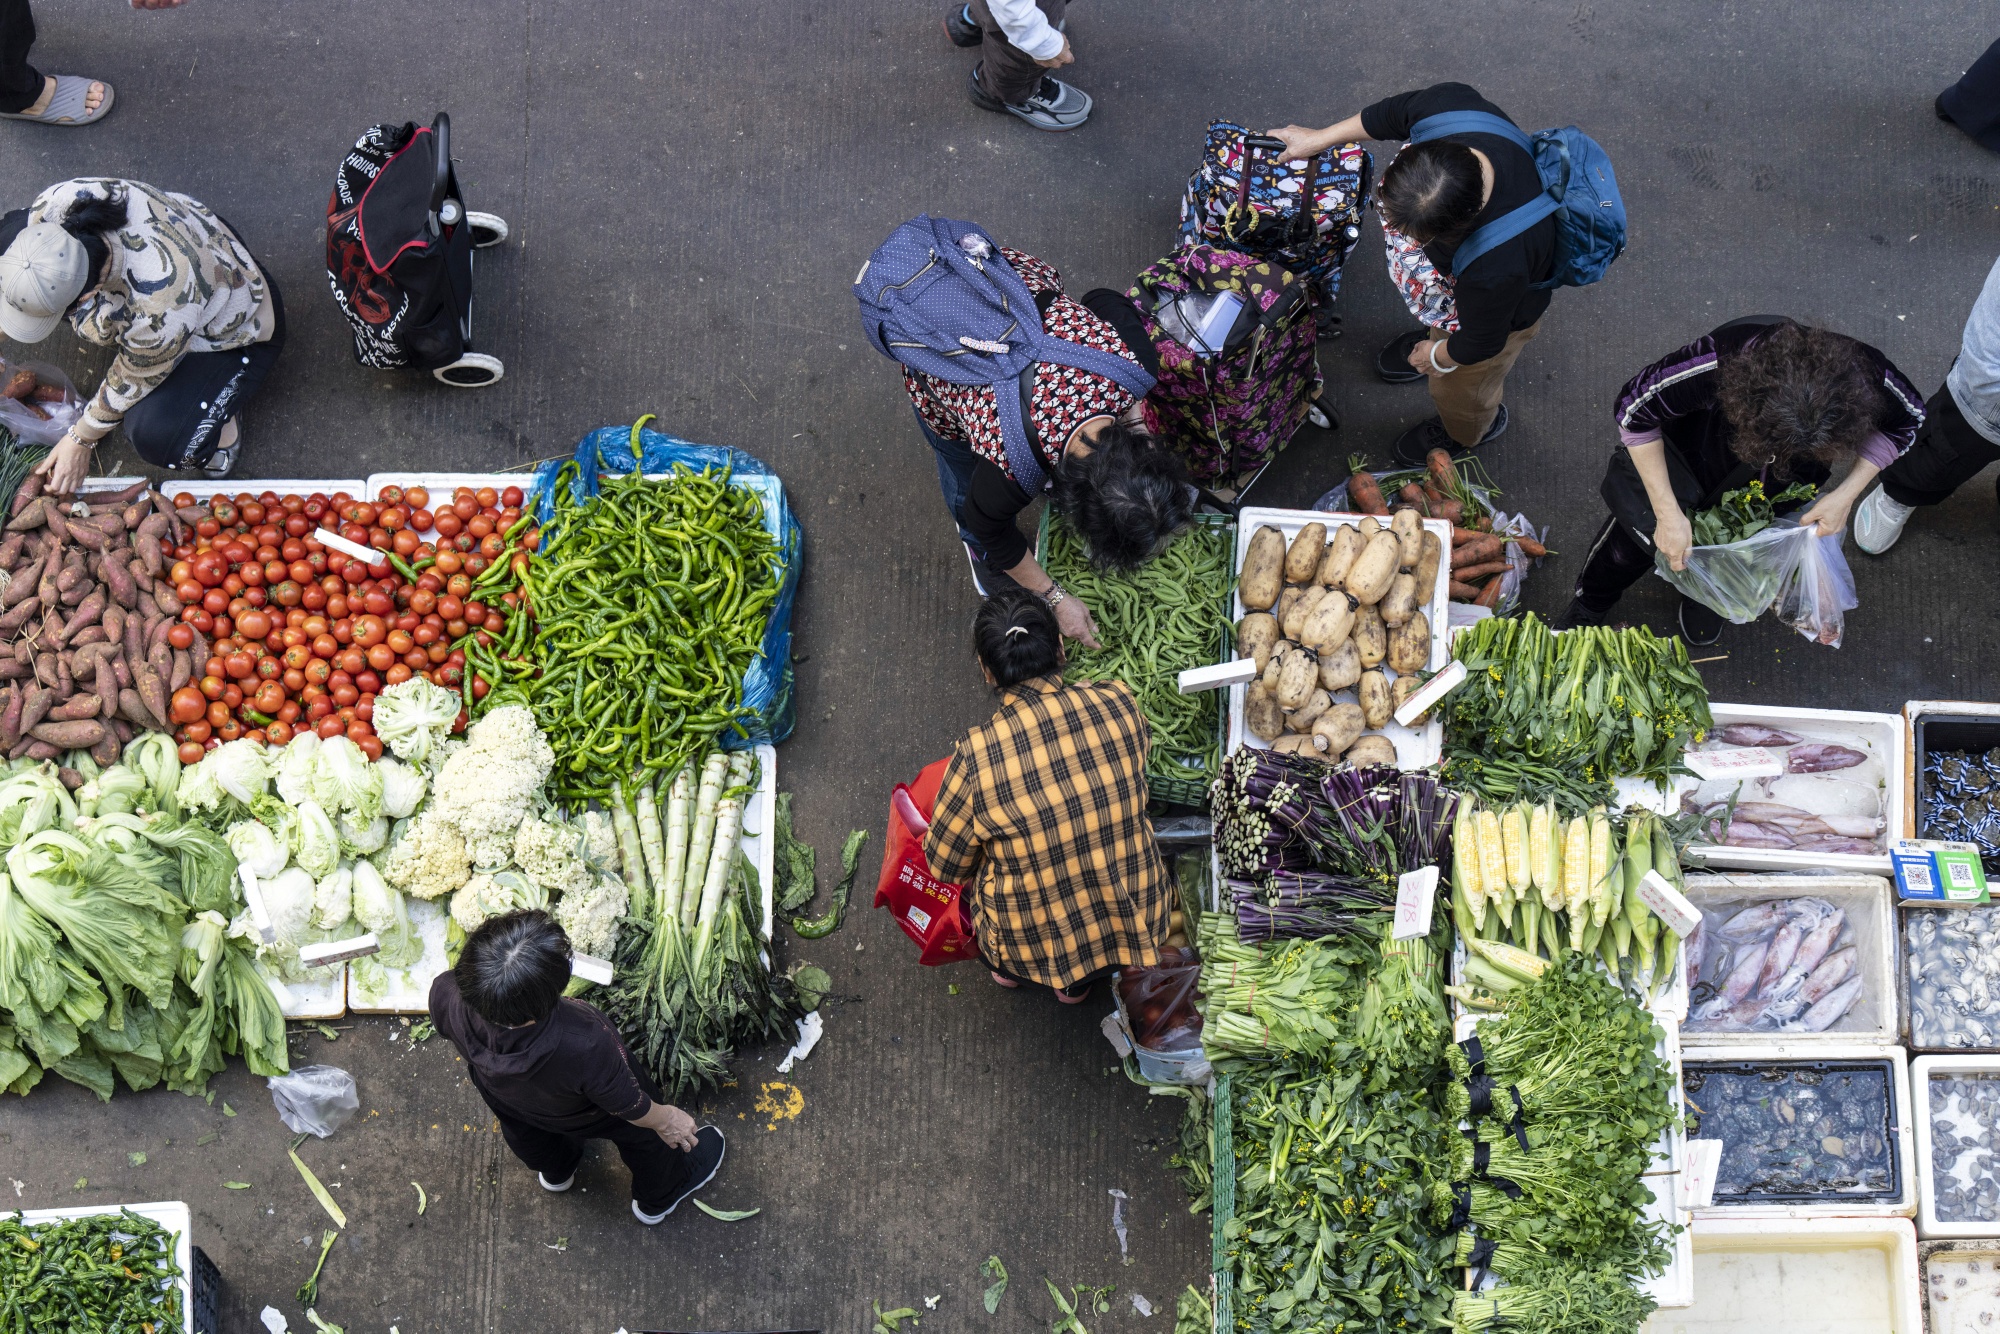 Customers shop vegetables at a market in Shenzhen, China.